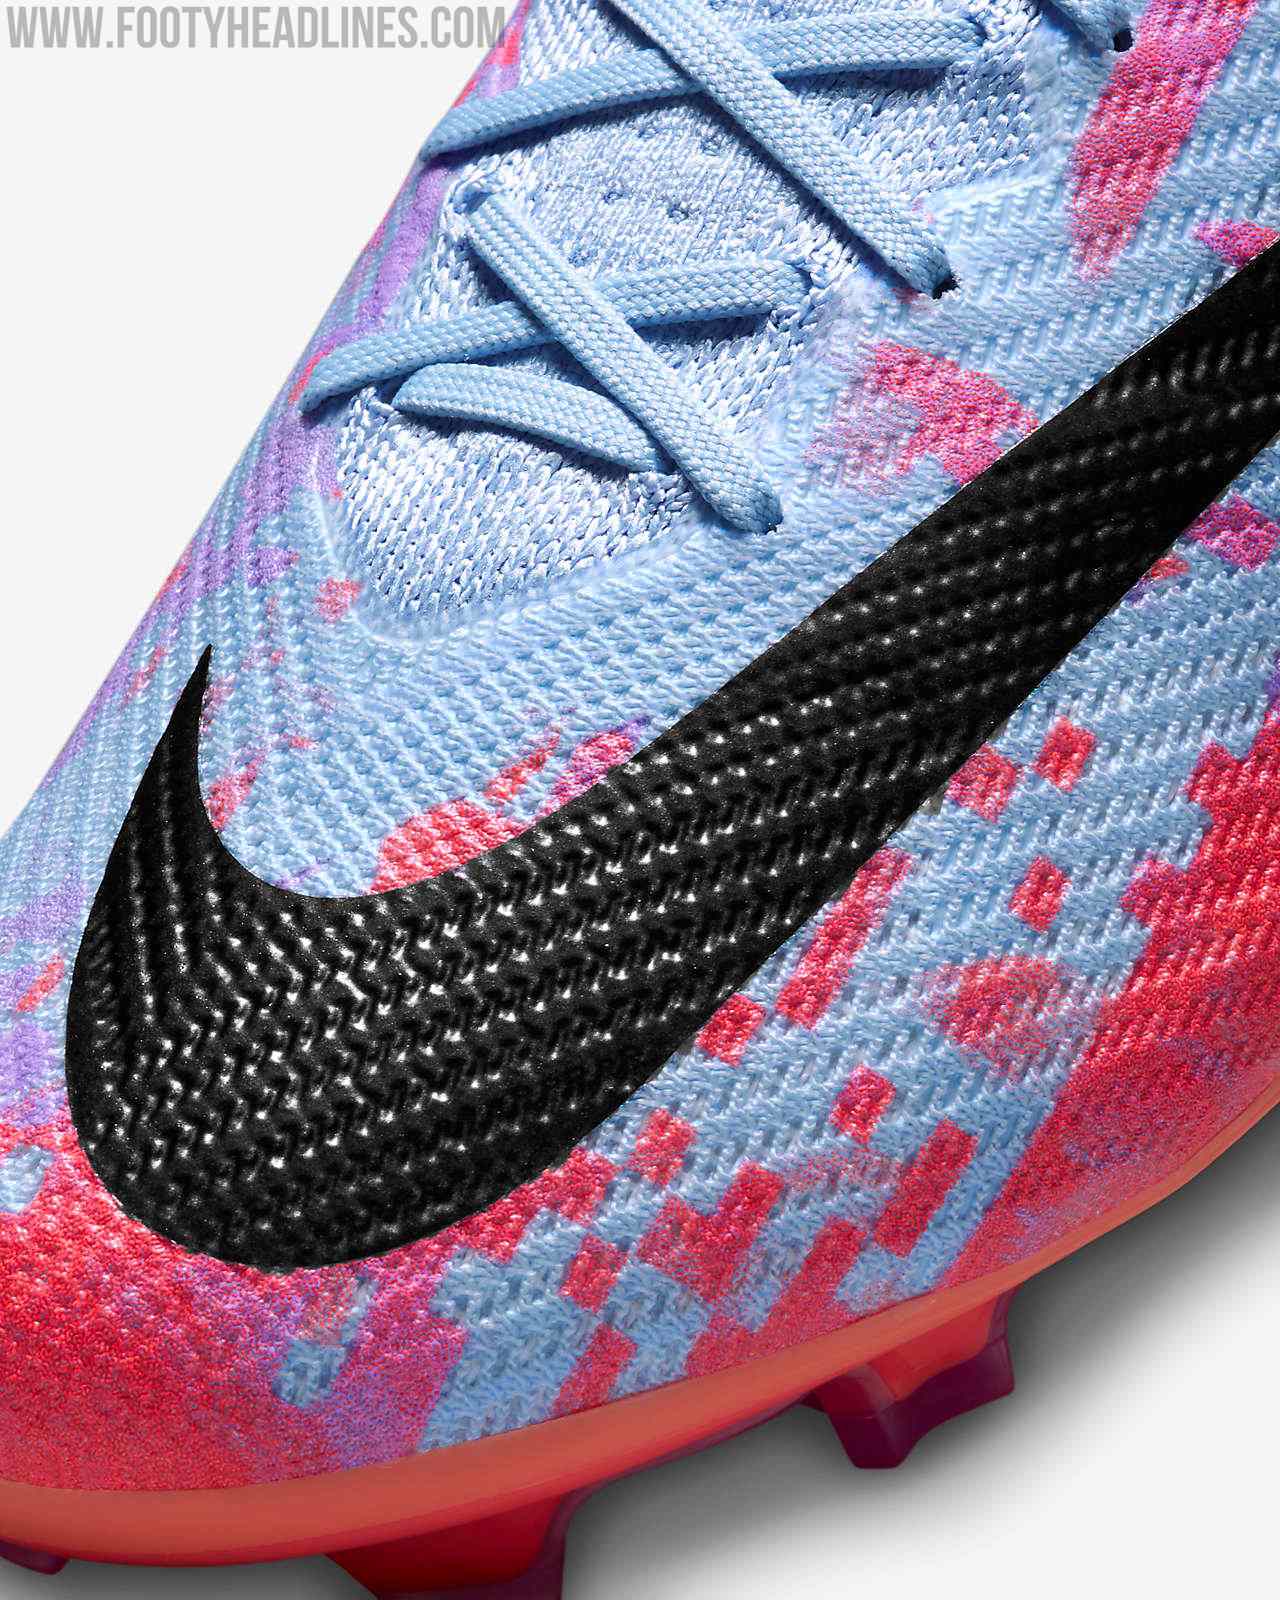 Mortal dieta Gran cantidad de Nike Mercurial Dream Speed 6 2023 Boots Revealed - Designed by Cristiano  Ronaldo, Worn By CR7, Mbappé, Kerr & More - Not Called "Valentine's Day" -  Footy Headlines